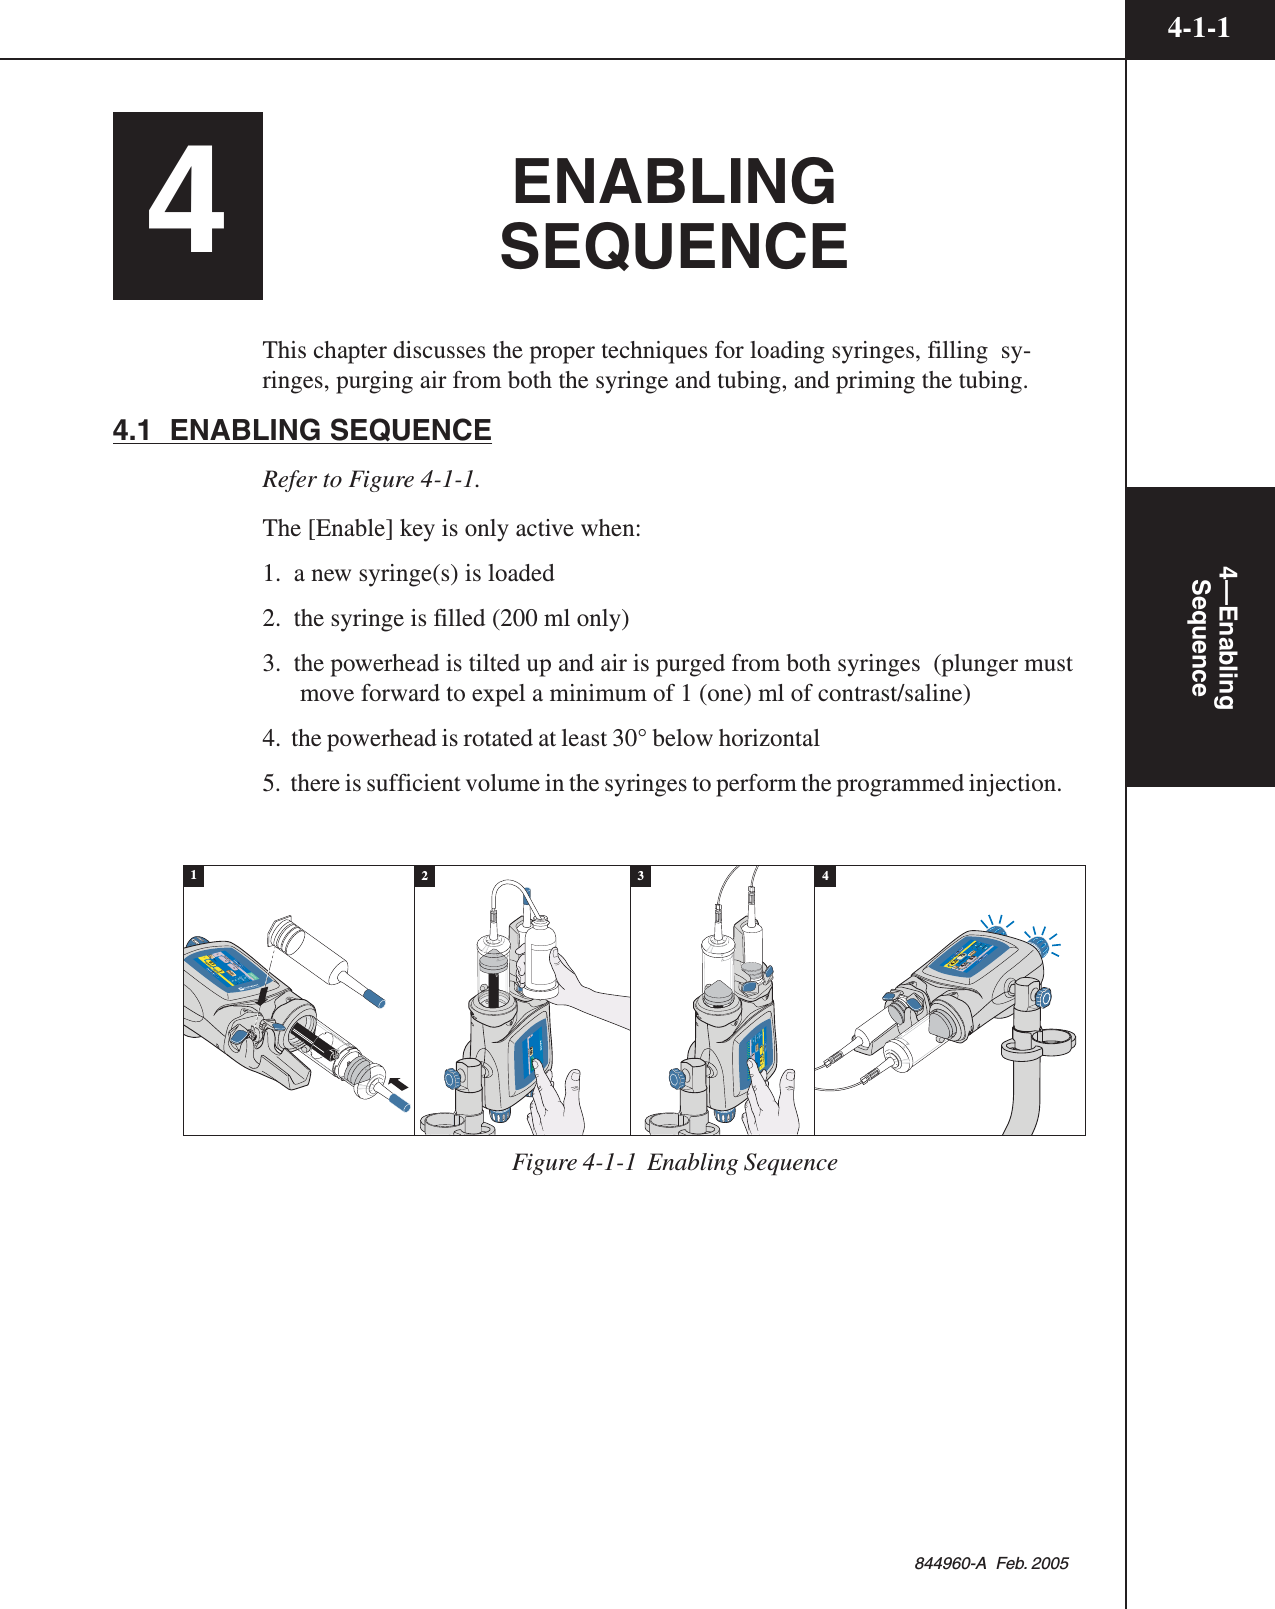 4-1-14—EnablingSequence844960-A  Feb. 20054ENABLINGSEQUENCEThis chapter discusses the proper techniques for loading syringes, filling  sy-ringes, purging air from both the syringe and tubing, and priming the tubing.4.1  ENABLING SEQUENCERefer to Figure 4-1-1.The [Enable] key is only active when:1.  a new syringe(s) is loaded2.  the syringe is filled (200 ml only)3.  the powerhead is tilted up and air is purged from both syringes  (plunger mustmove forward to expel a minimum of 1 (one) ml of contrast/saline)4.  the powerhead is rotated at least 30° below horizontal5.  there is sufficient volume in the syringes to perform the programmed injection.Inject DelayLiver ExaminationABFlow (ml/sec)      Volume (ml)Flow (ml/sec)      Volume (ml)73AA1584.04.0 83Scan DelayPeak PSI1580020Enable1-0.11--Inject DelayScan DelayName12Flow (ml/sec)      Volume (ml) Flow (ml/sec)      Volume (ml) PSI000AAEnableCheck for air50502BFill Volume (ml)200Auto FillStart Auto Fill43Inject DelayScan DelayName1Flow (ml/sec)      Volume (ml) Peak PSI0000.1 10.1-10.1125AAEnable2Flow (ml/sec)      Volume (ml) 120Figure 4-1-1  Enabling Sequence